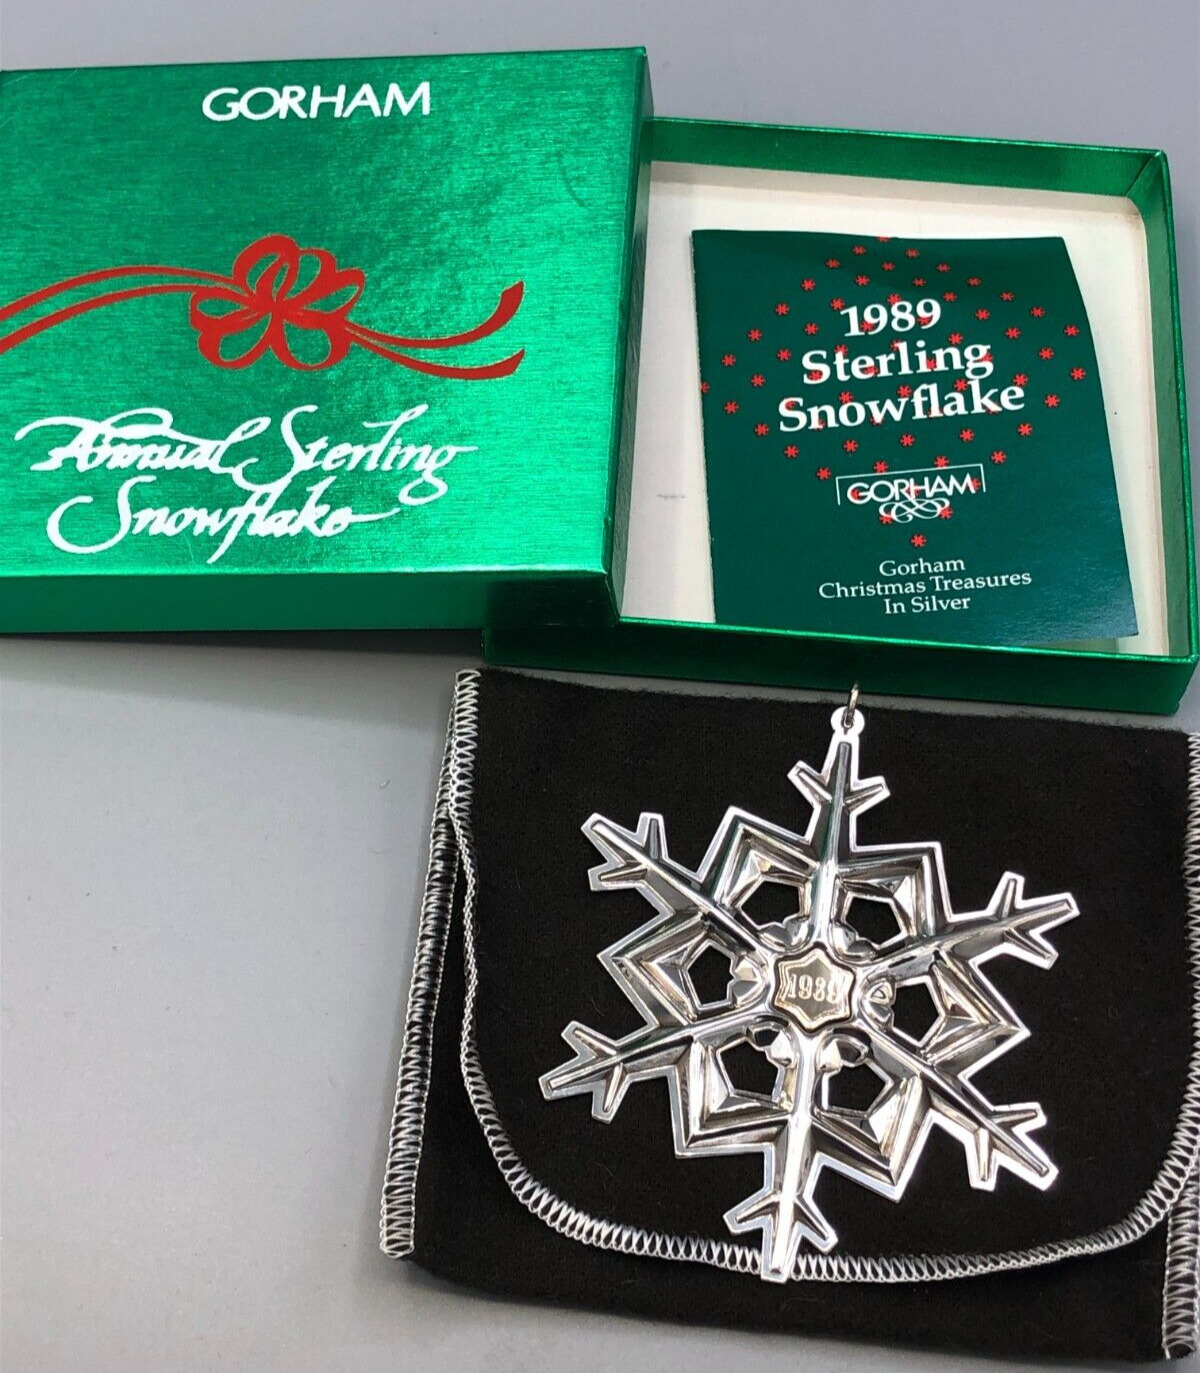 Gorham Sterling Silver 1989 Annual Snowflake Ornament, with box